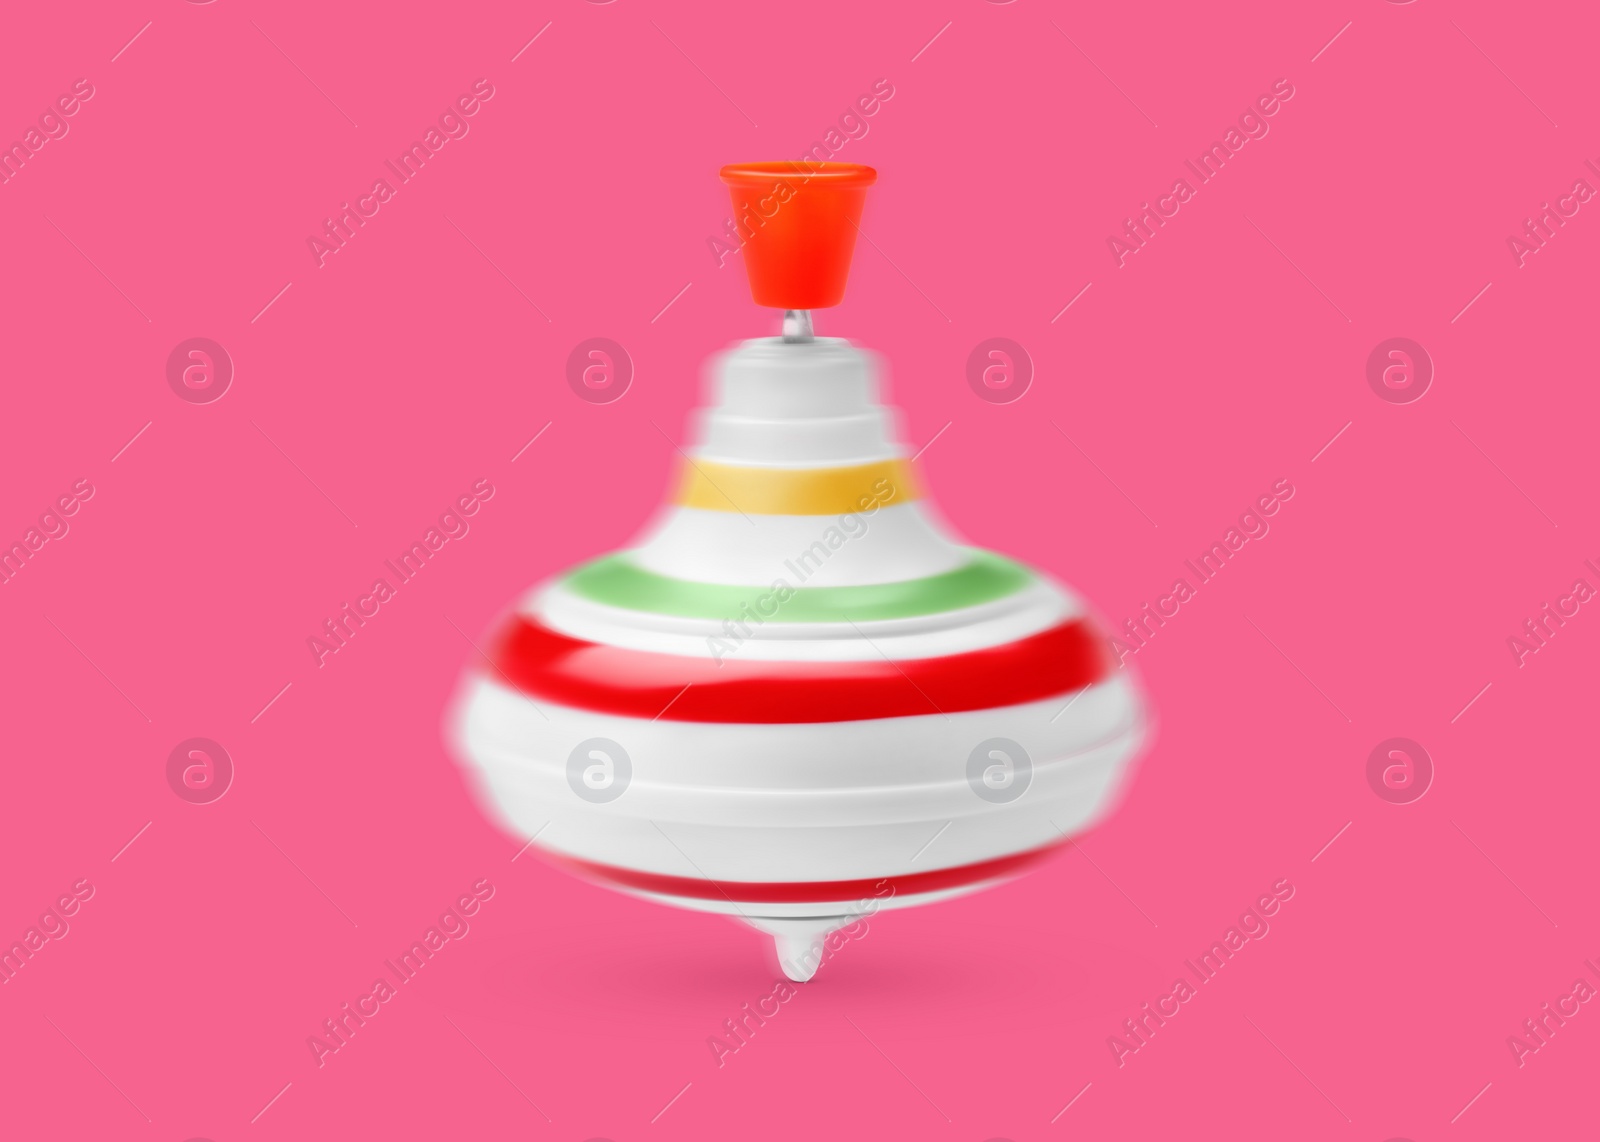 Image of One spinning top in motion on pink background. Toy whirligig